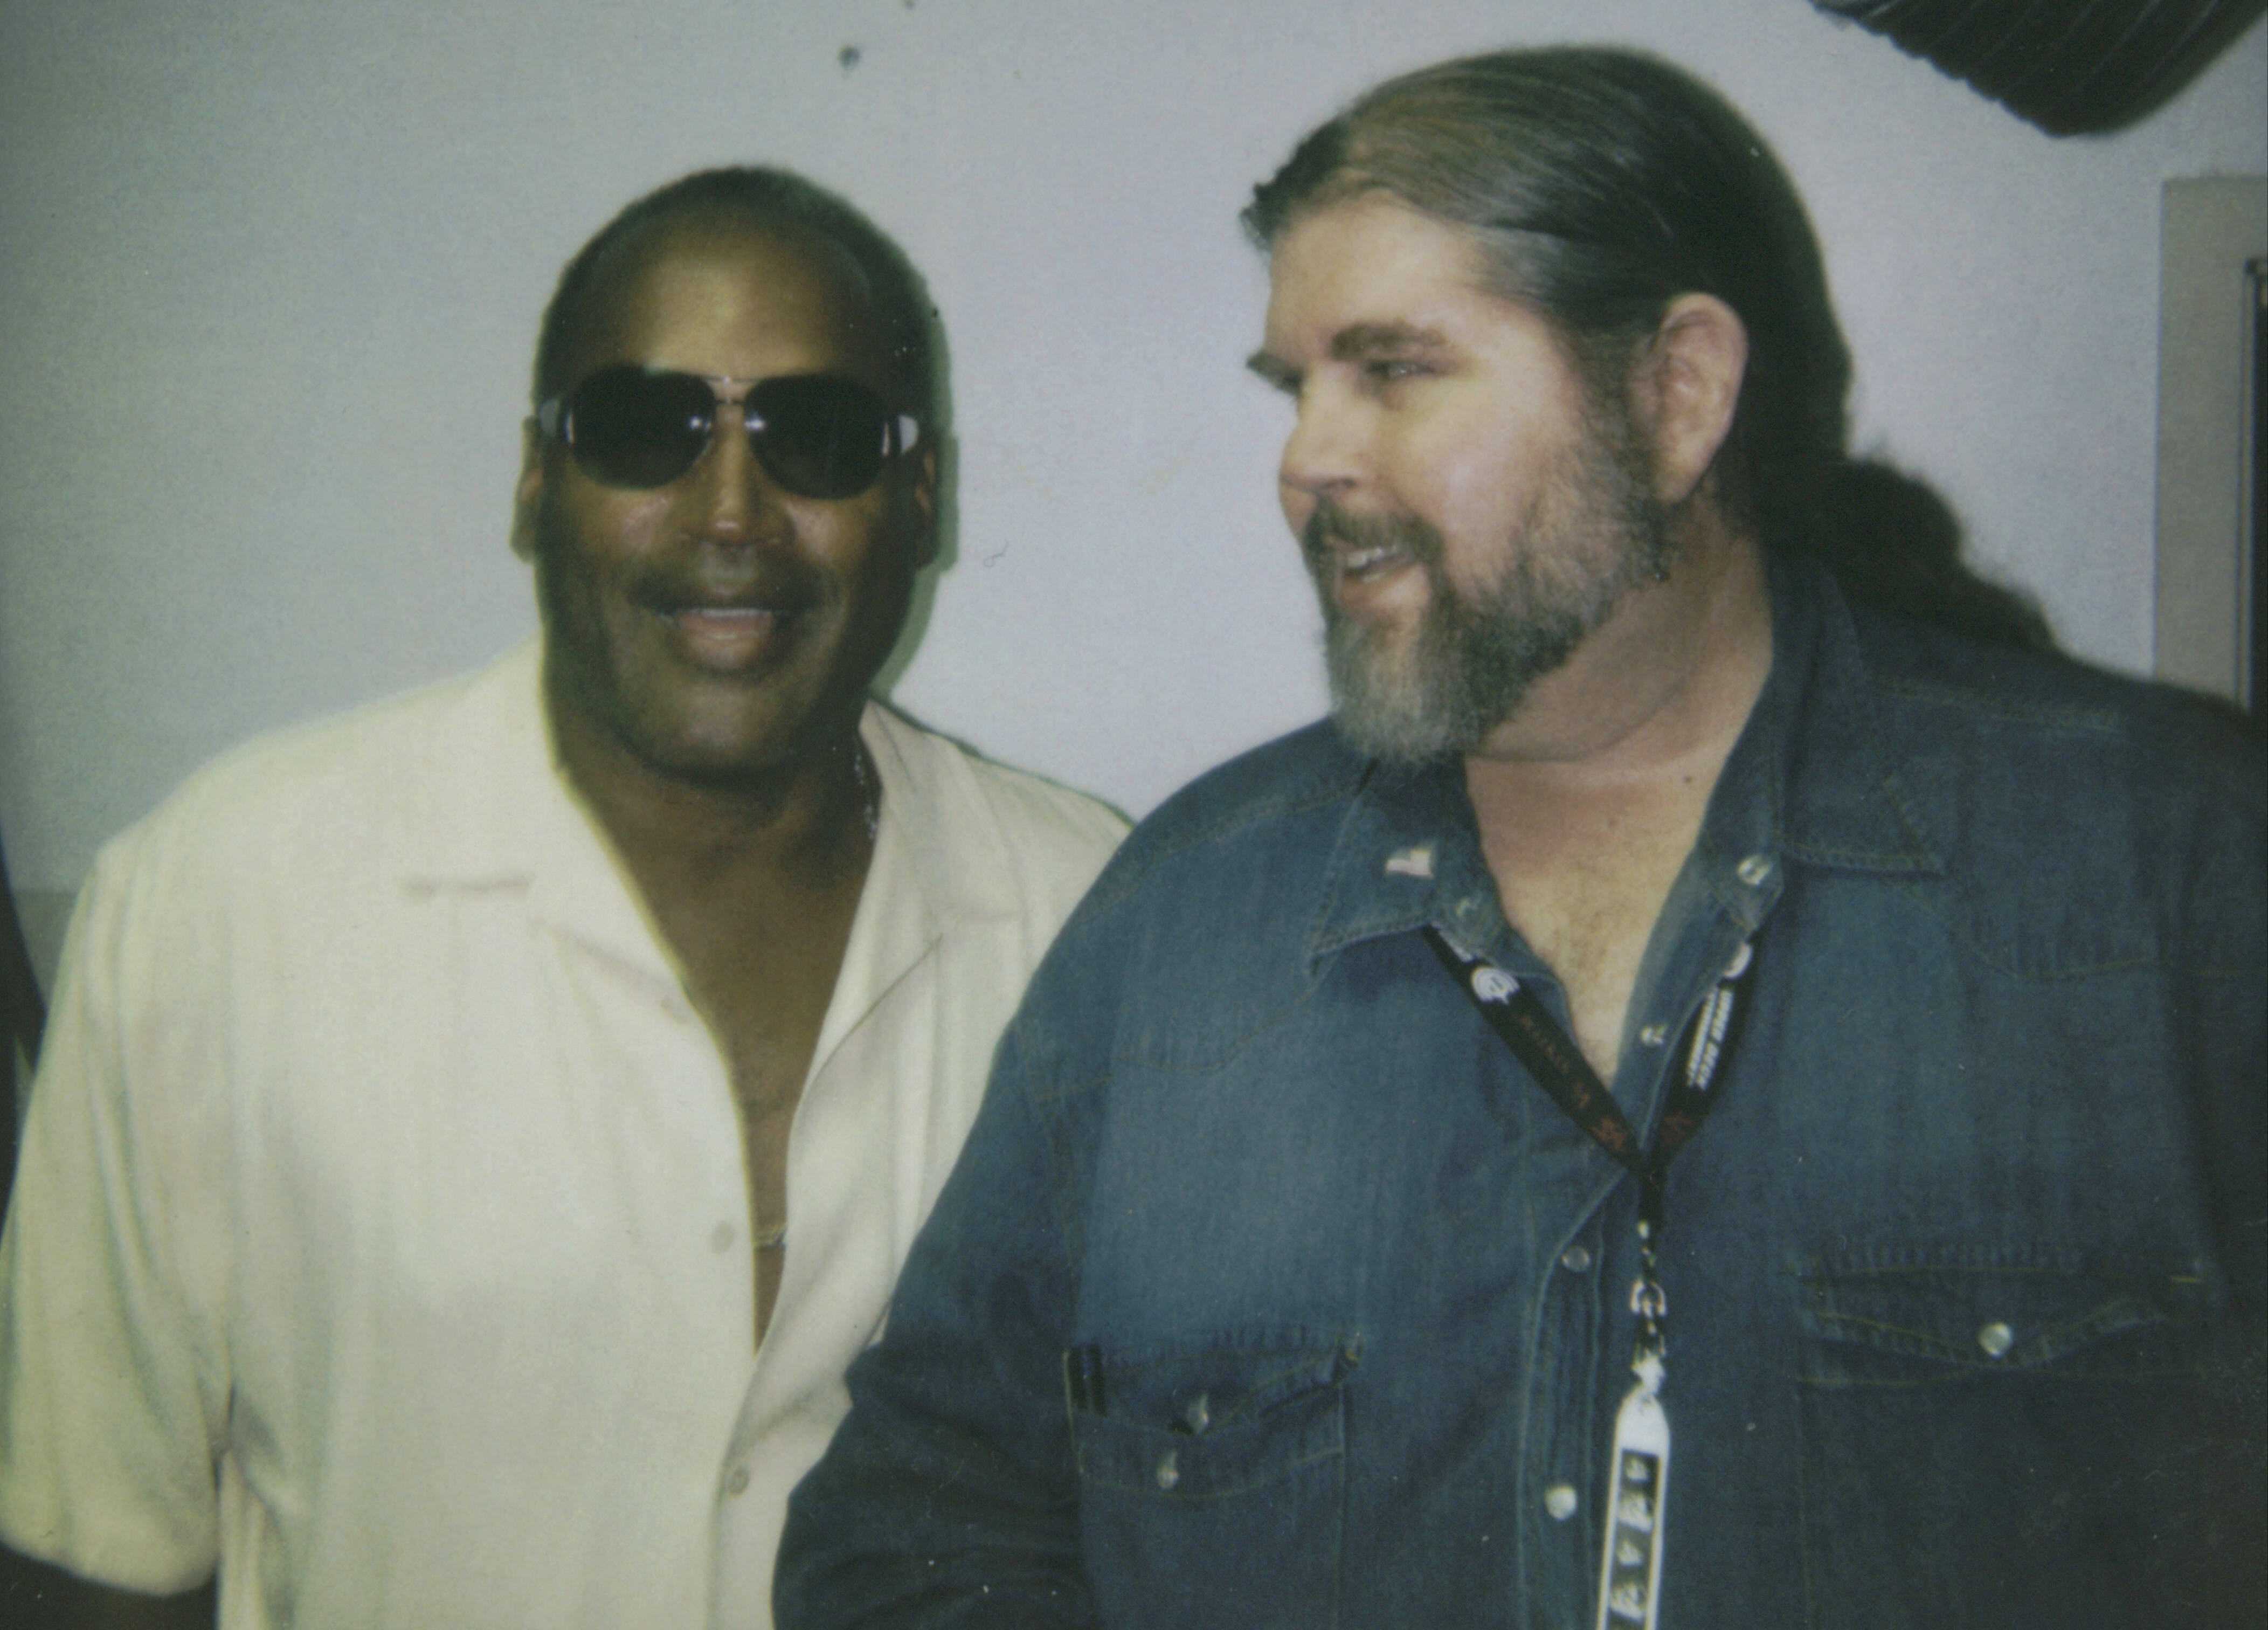 J. Neil Schulman, author of The Frame of the Century?, photographed with the subject of his journalistic investigation, O.J. Simpson, following an hour in which Schulman sat with Simpson while Simpson was autographing sports memorabilia at the October 1, 2005 NecroComicon Convention. The photograph was taken by Thomas Riccio, whose testimony later convicted Simpson of armed robbery of property Simpson claimed was his own in a Las Vegas casino hotel.